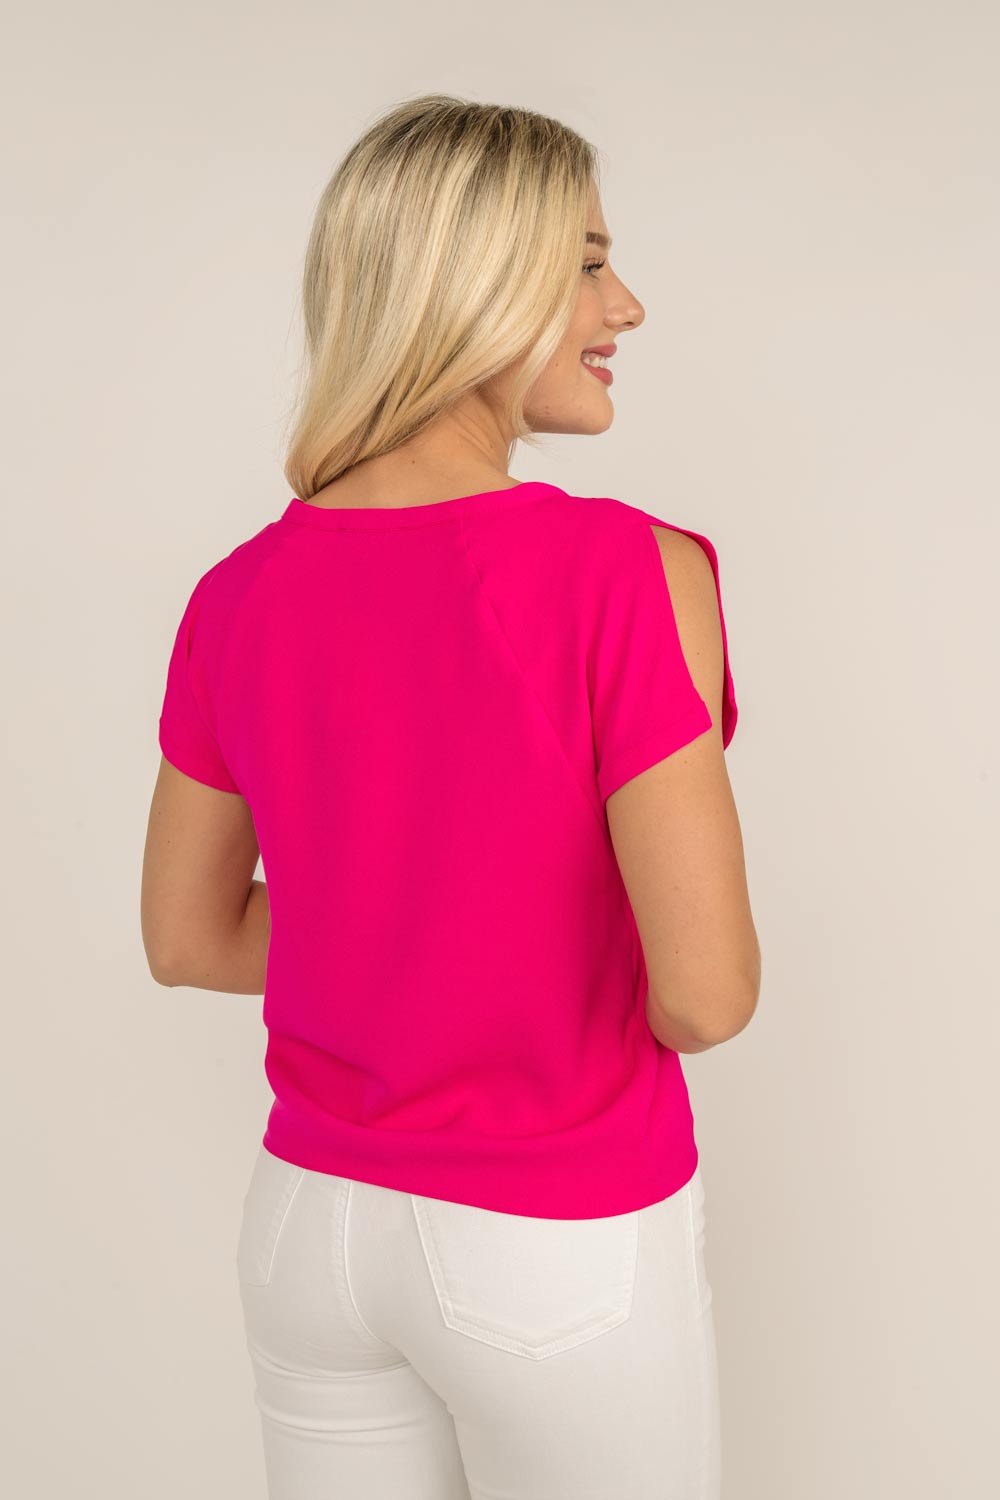 Women's Clothing FRANK LYMAN (181224) Short Sleeve Top with Side Tie in HOT_PINK